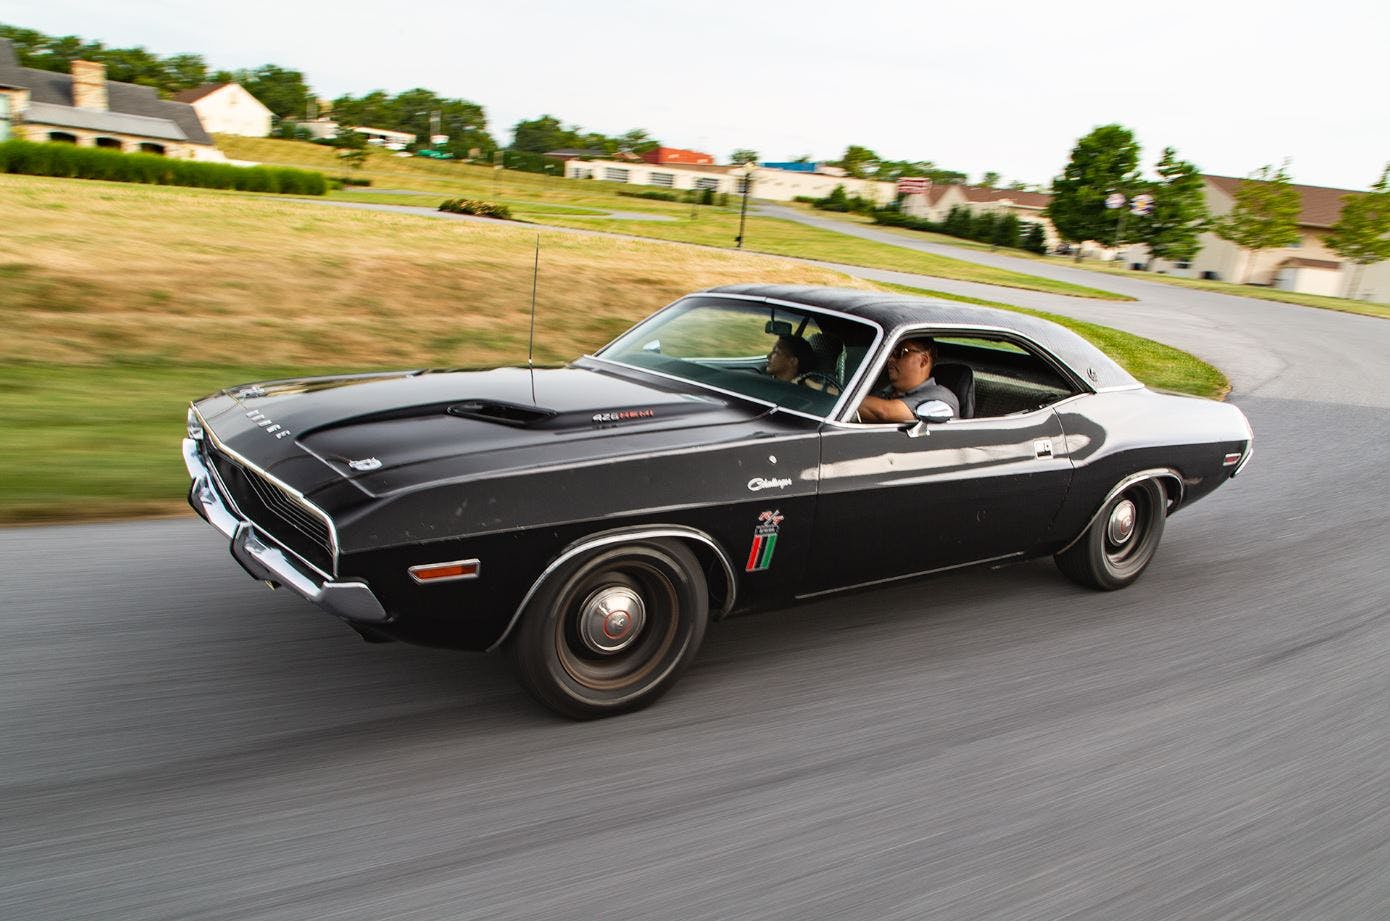 This street racing Dodge Challenger has an incredible backstory